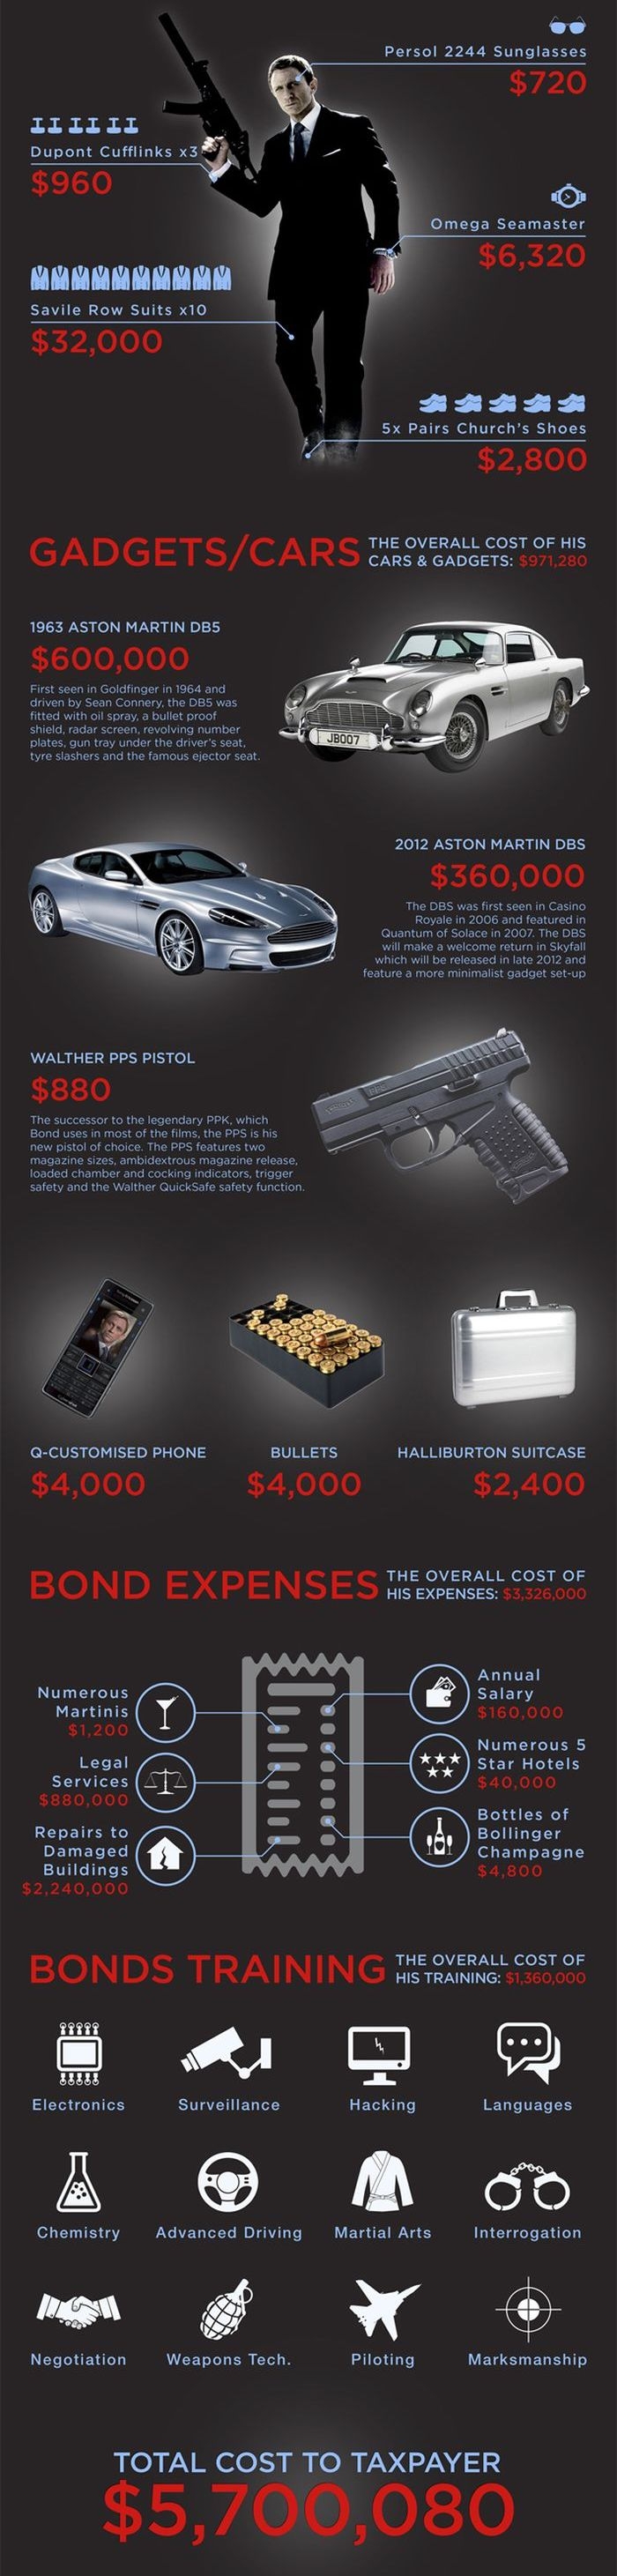 How Much Does James Bond Cost The Taxpayer?